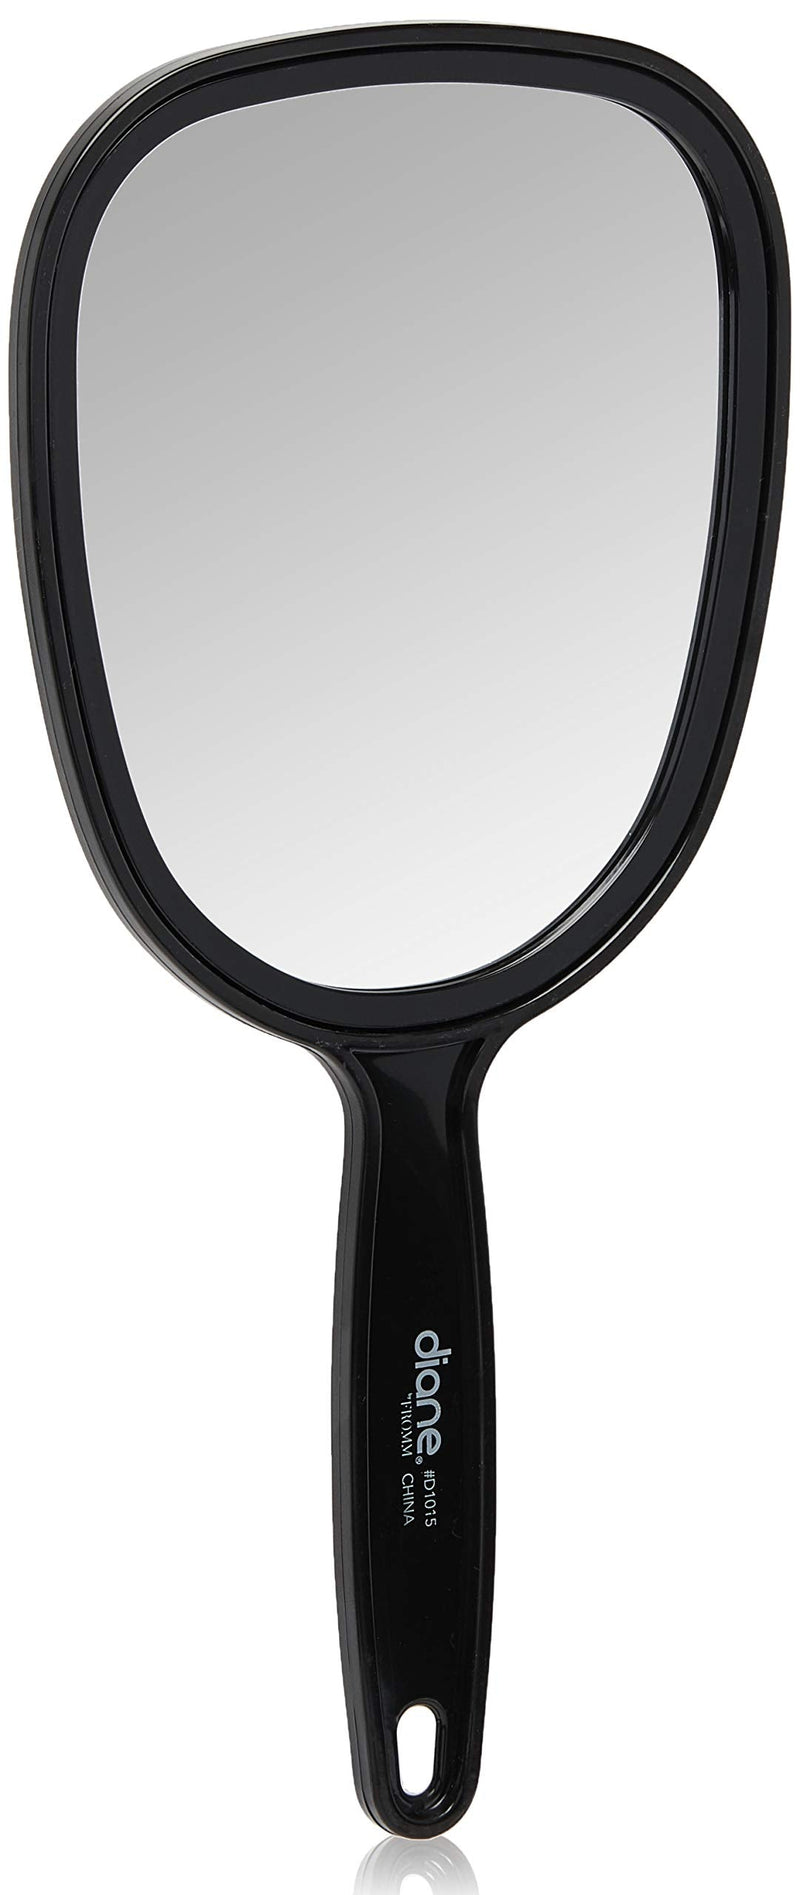 [Australia] - Diane Plastic Handheld Mirror – Vanity Oval Mirror with Hanging Hole in Handle – Small Size (5” x 11”) for Travel, Bathroom, Desk, Makeup, Beauty, Grooming, Shaving, D1015 5 x 11 Inch 